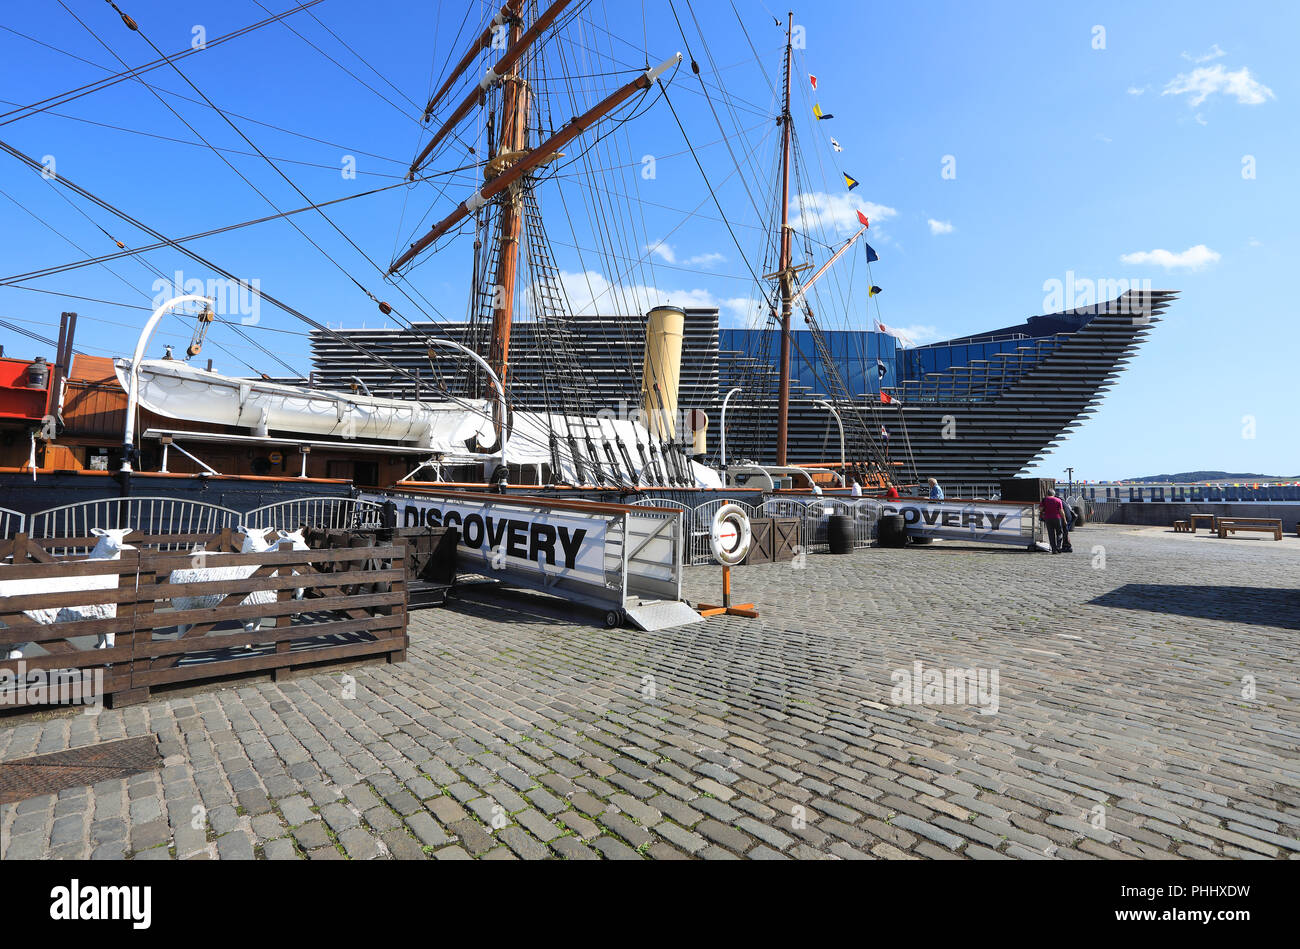 The RRS Discovery ship with Kengo Kuma's new V&A Dundee behind, on the city's waterfront, in Scotland, UK Stock Photo